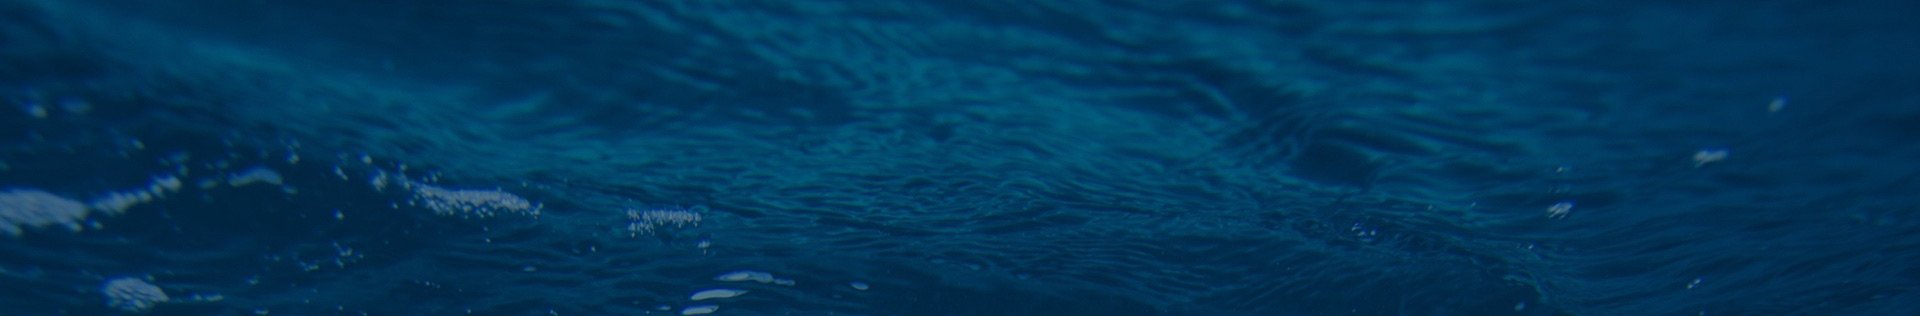 Blue water background image